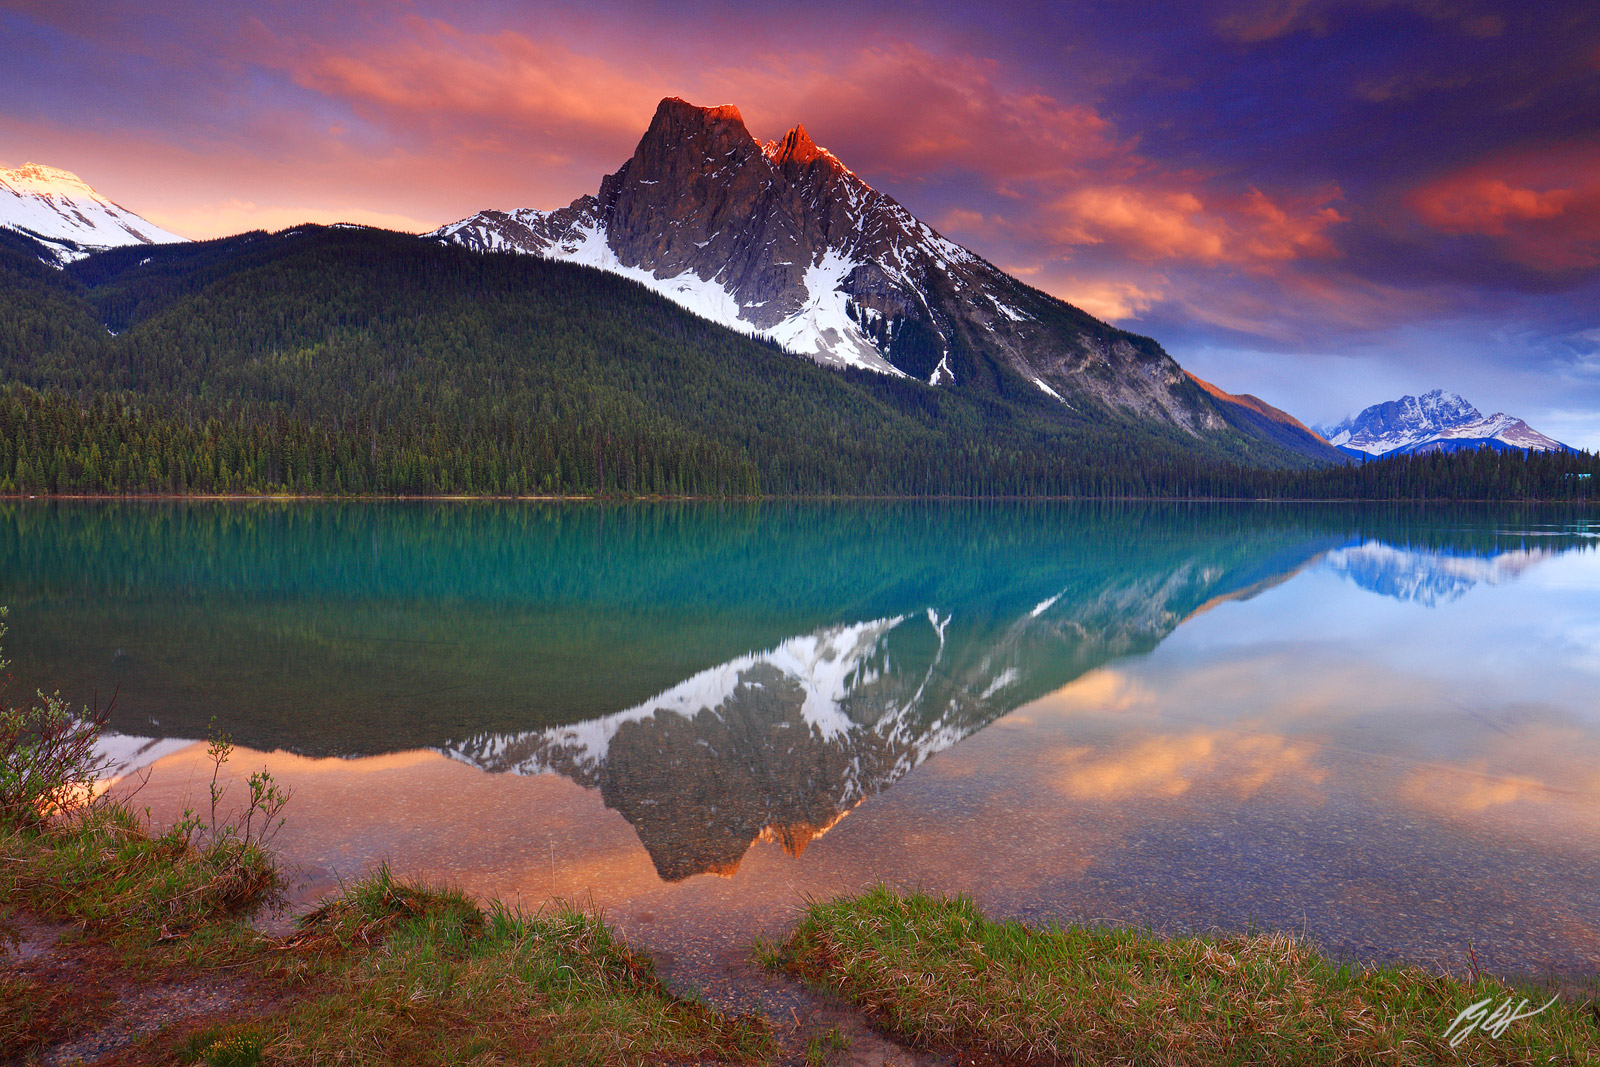 Sunset with Wapta Mountain Reflected in Emerald Lake in Yoho National Park in British Columbia Canada